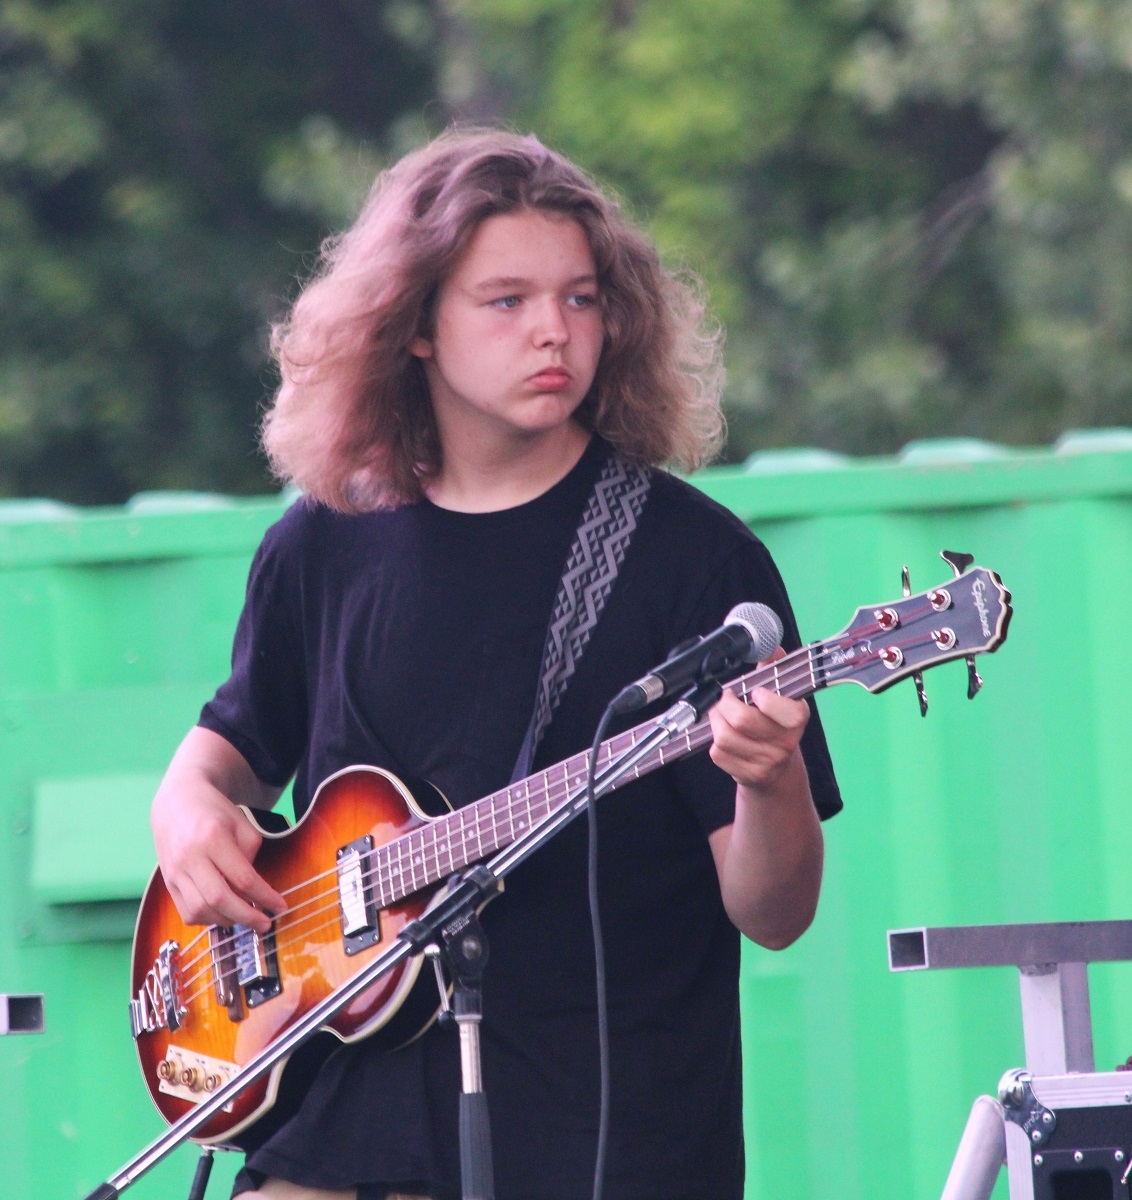 School of Rock Orleans à Orleans: Jamming outside on Canada Day